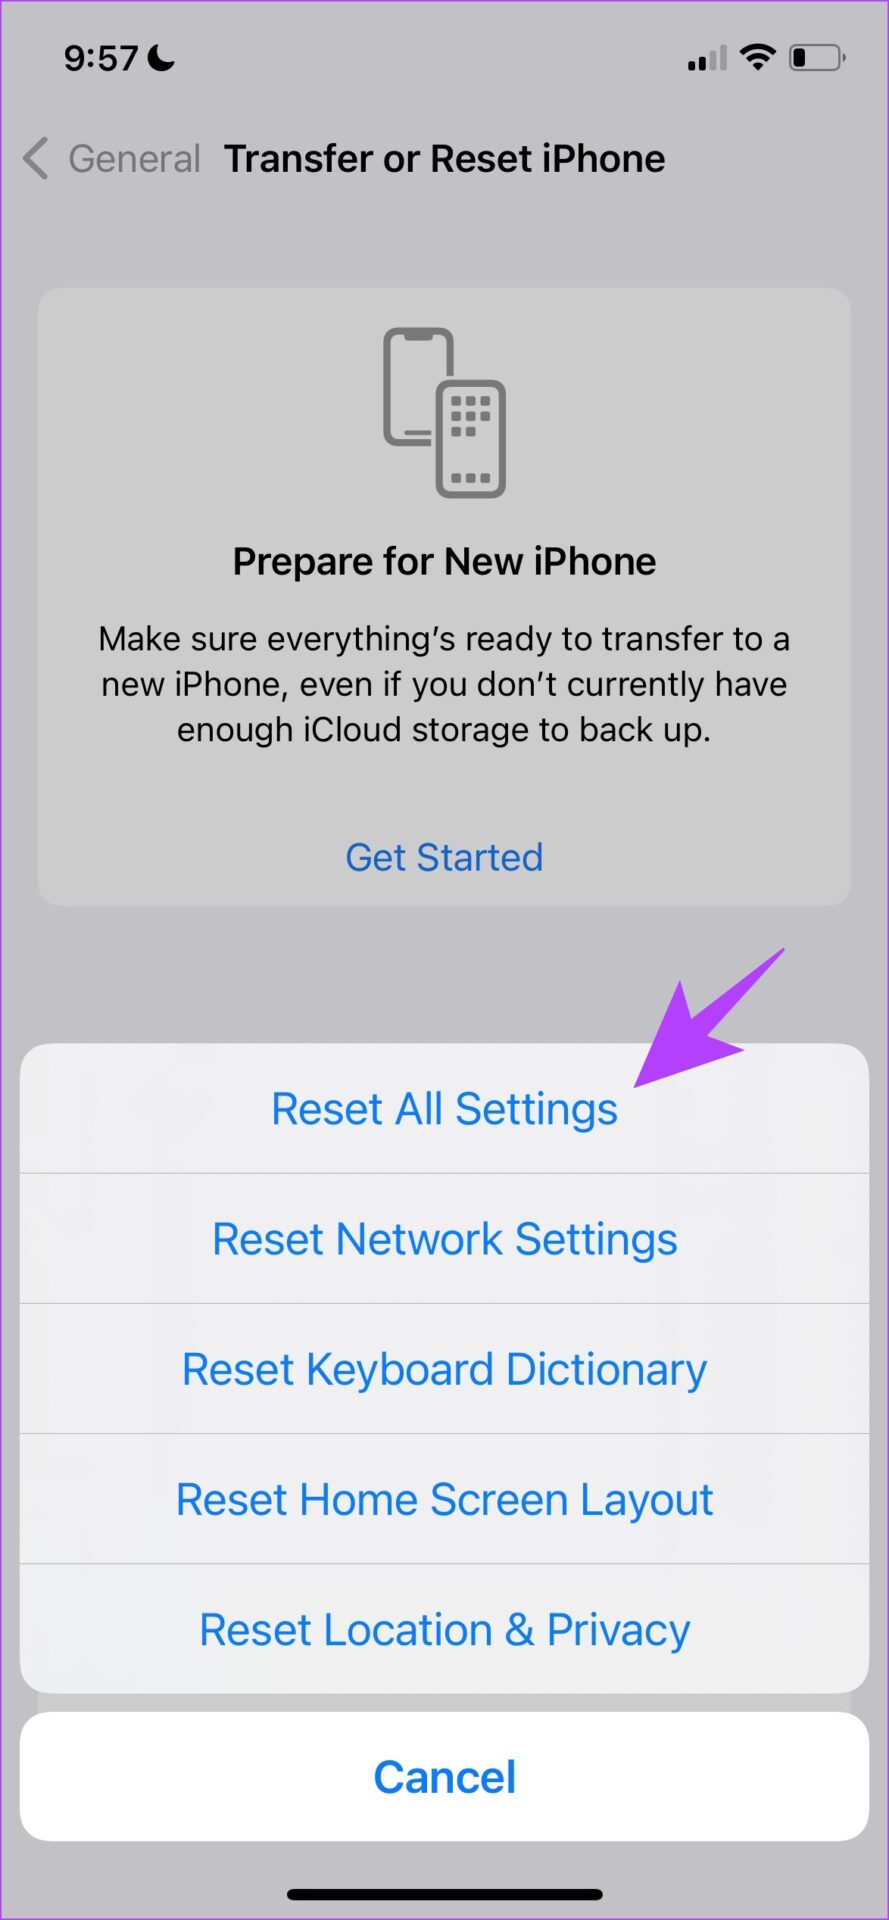 Select Reset all settings on iPhone.